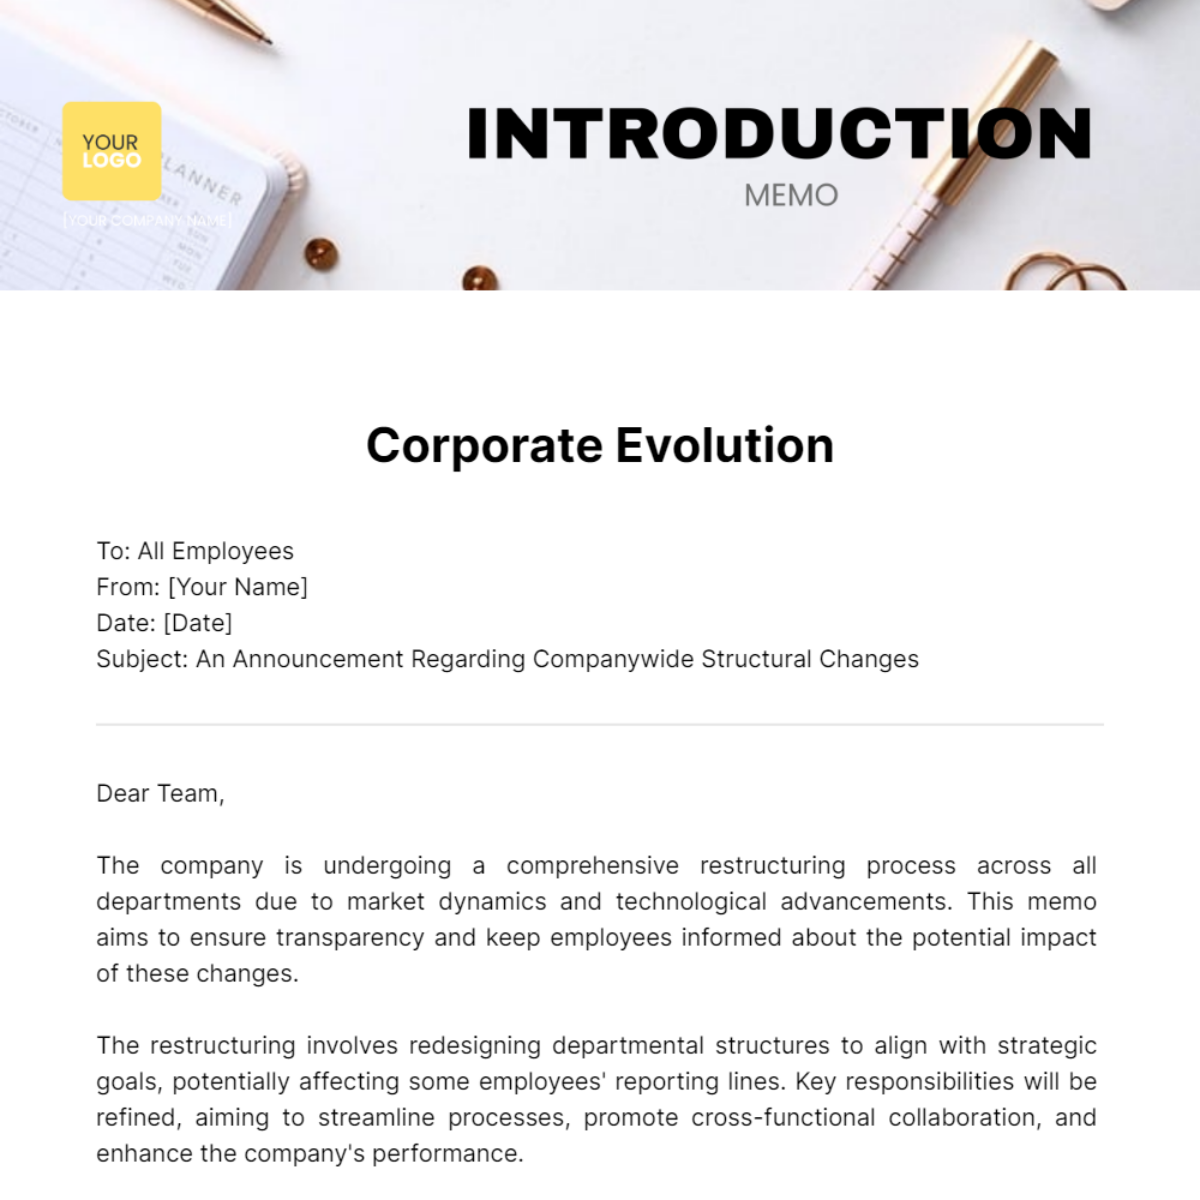 Introduction Memo Template